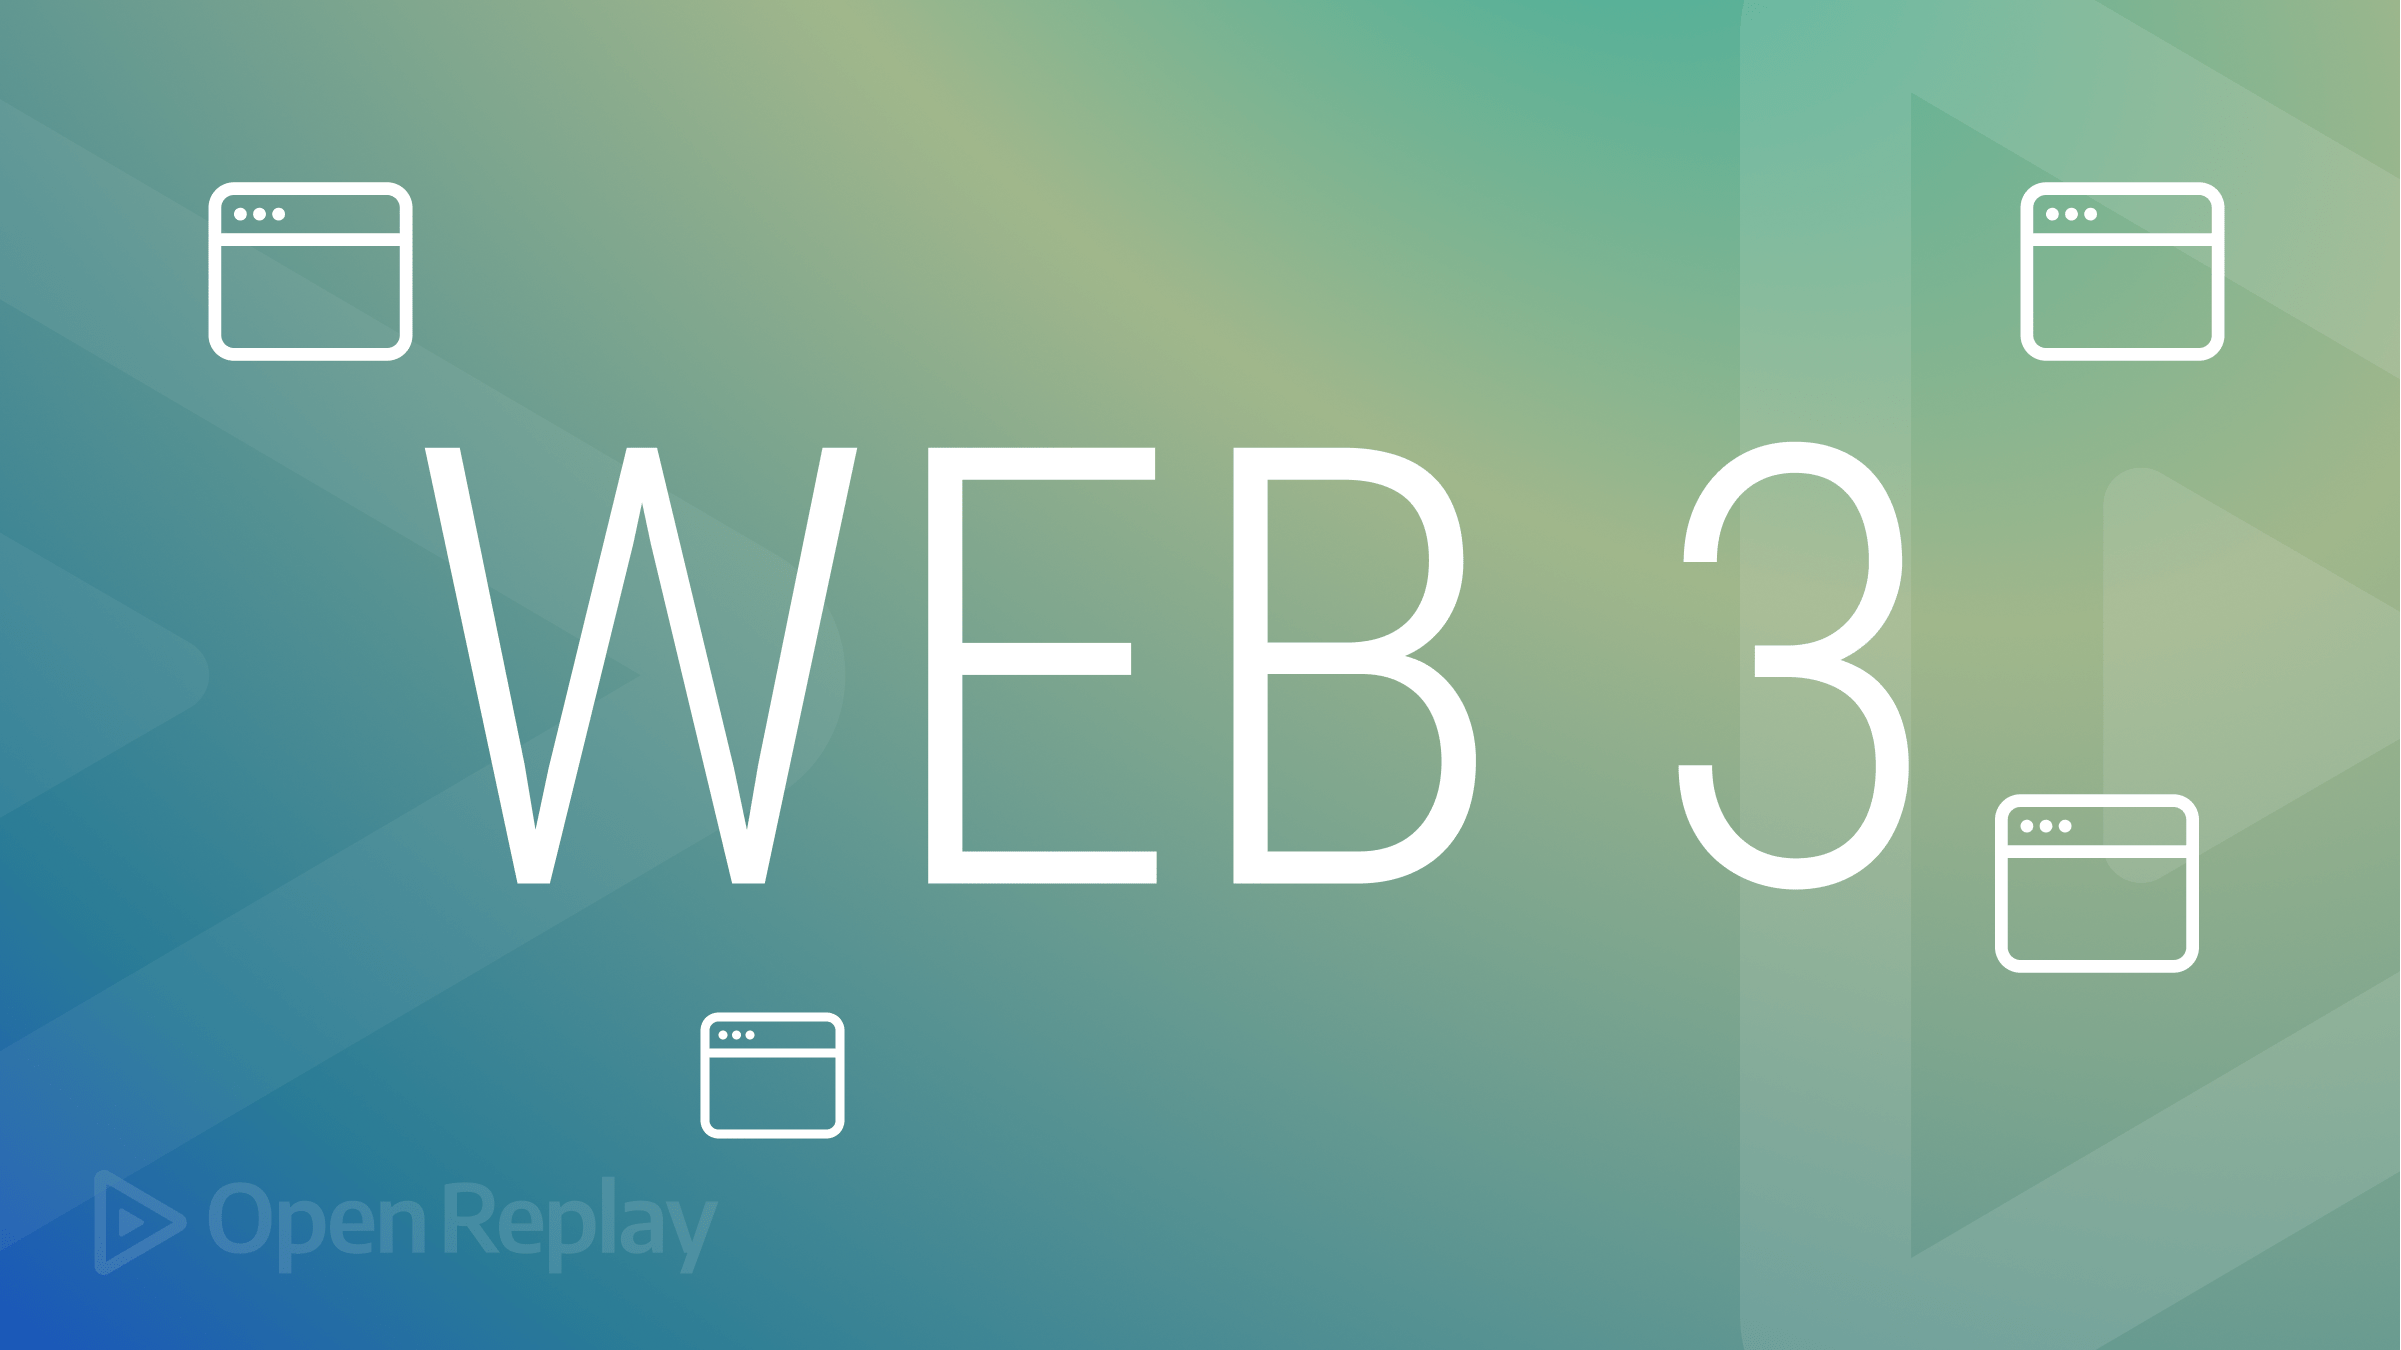 Web3: the new, decentralized Web